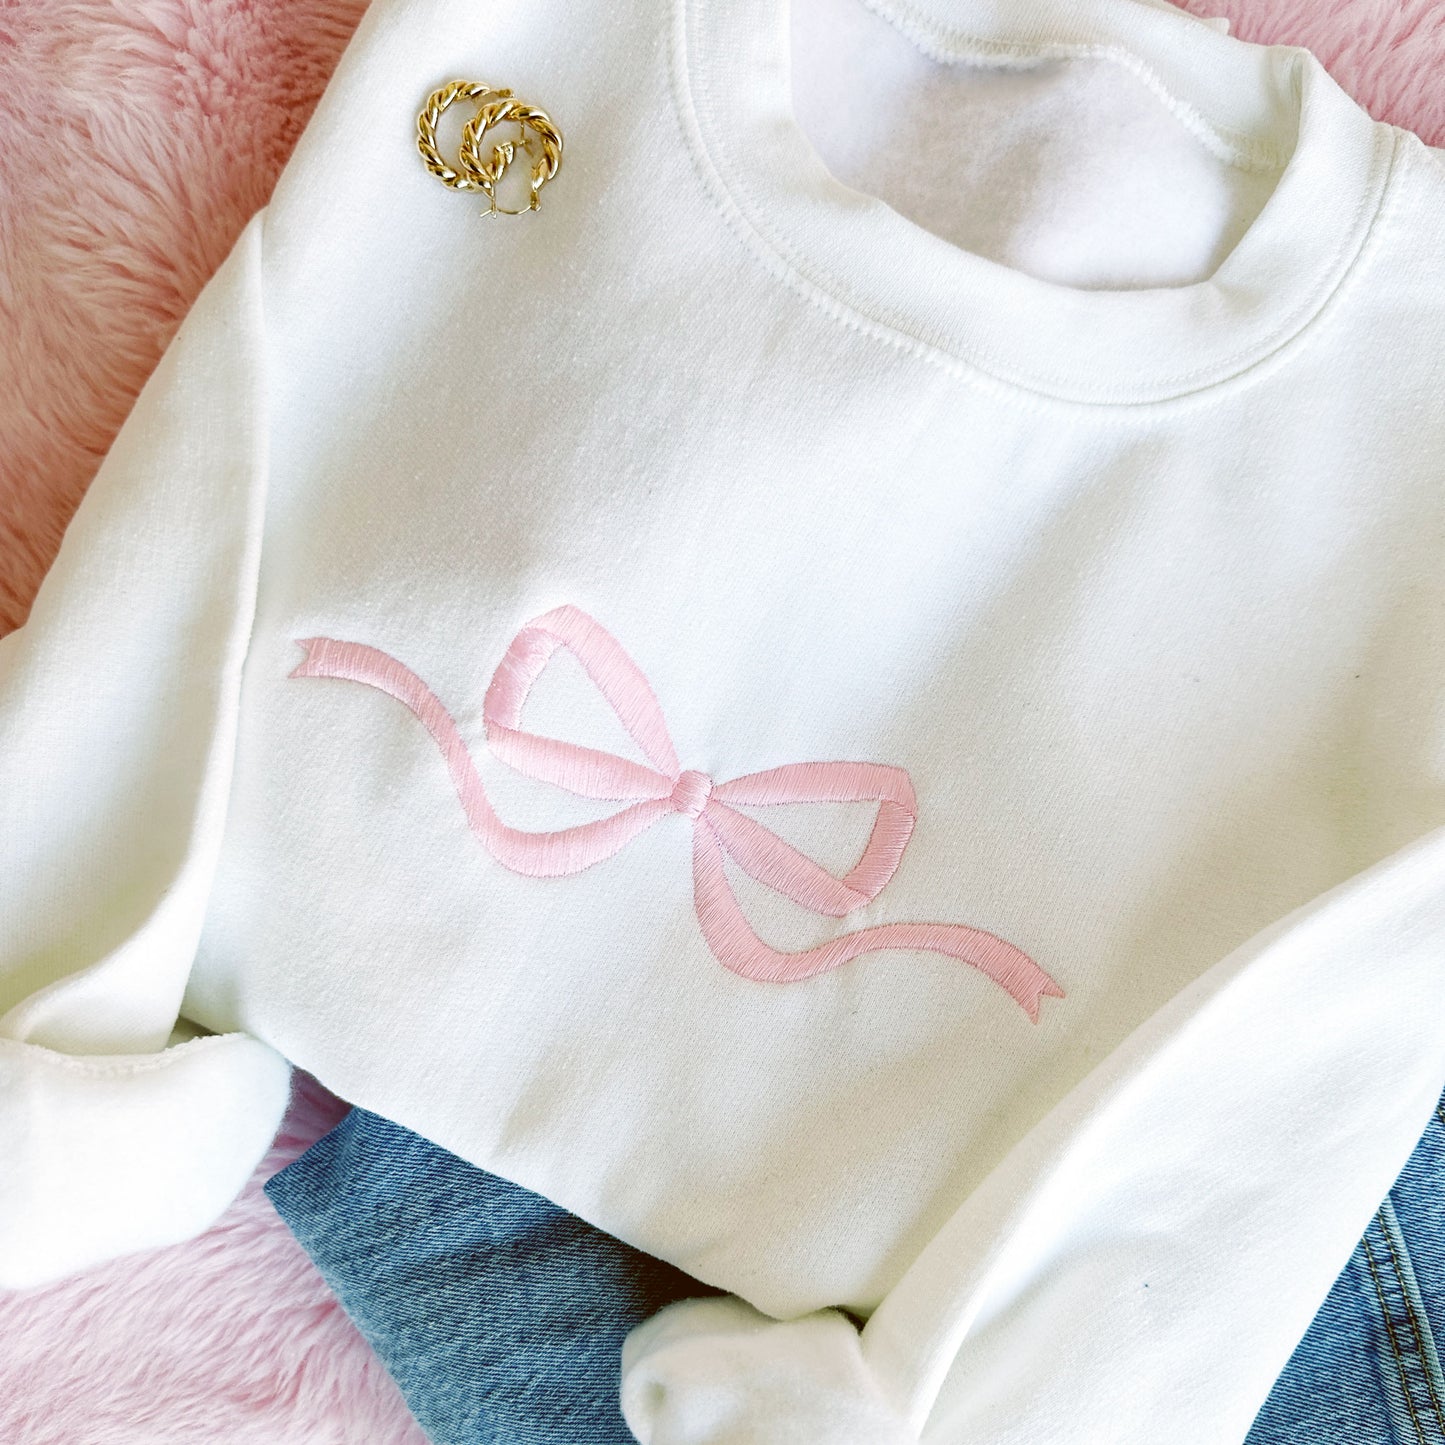 styled flat lay of embroidered bow design on a white crewneck sweatshirt with earrings and jeans in the background